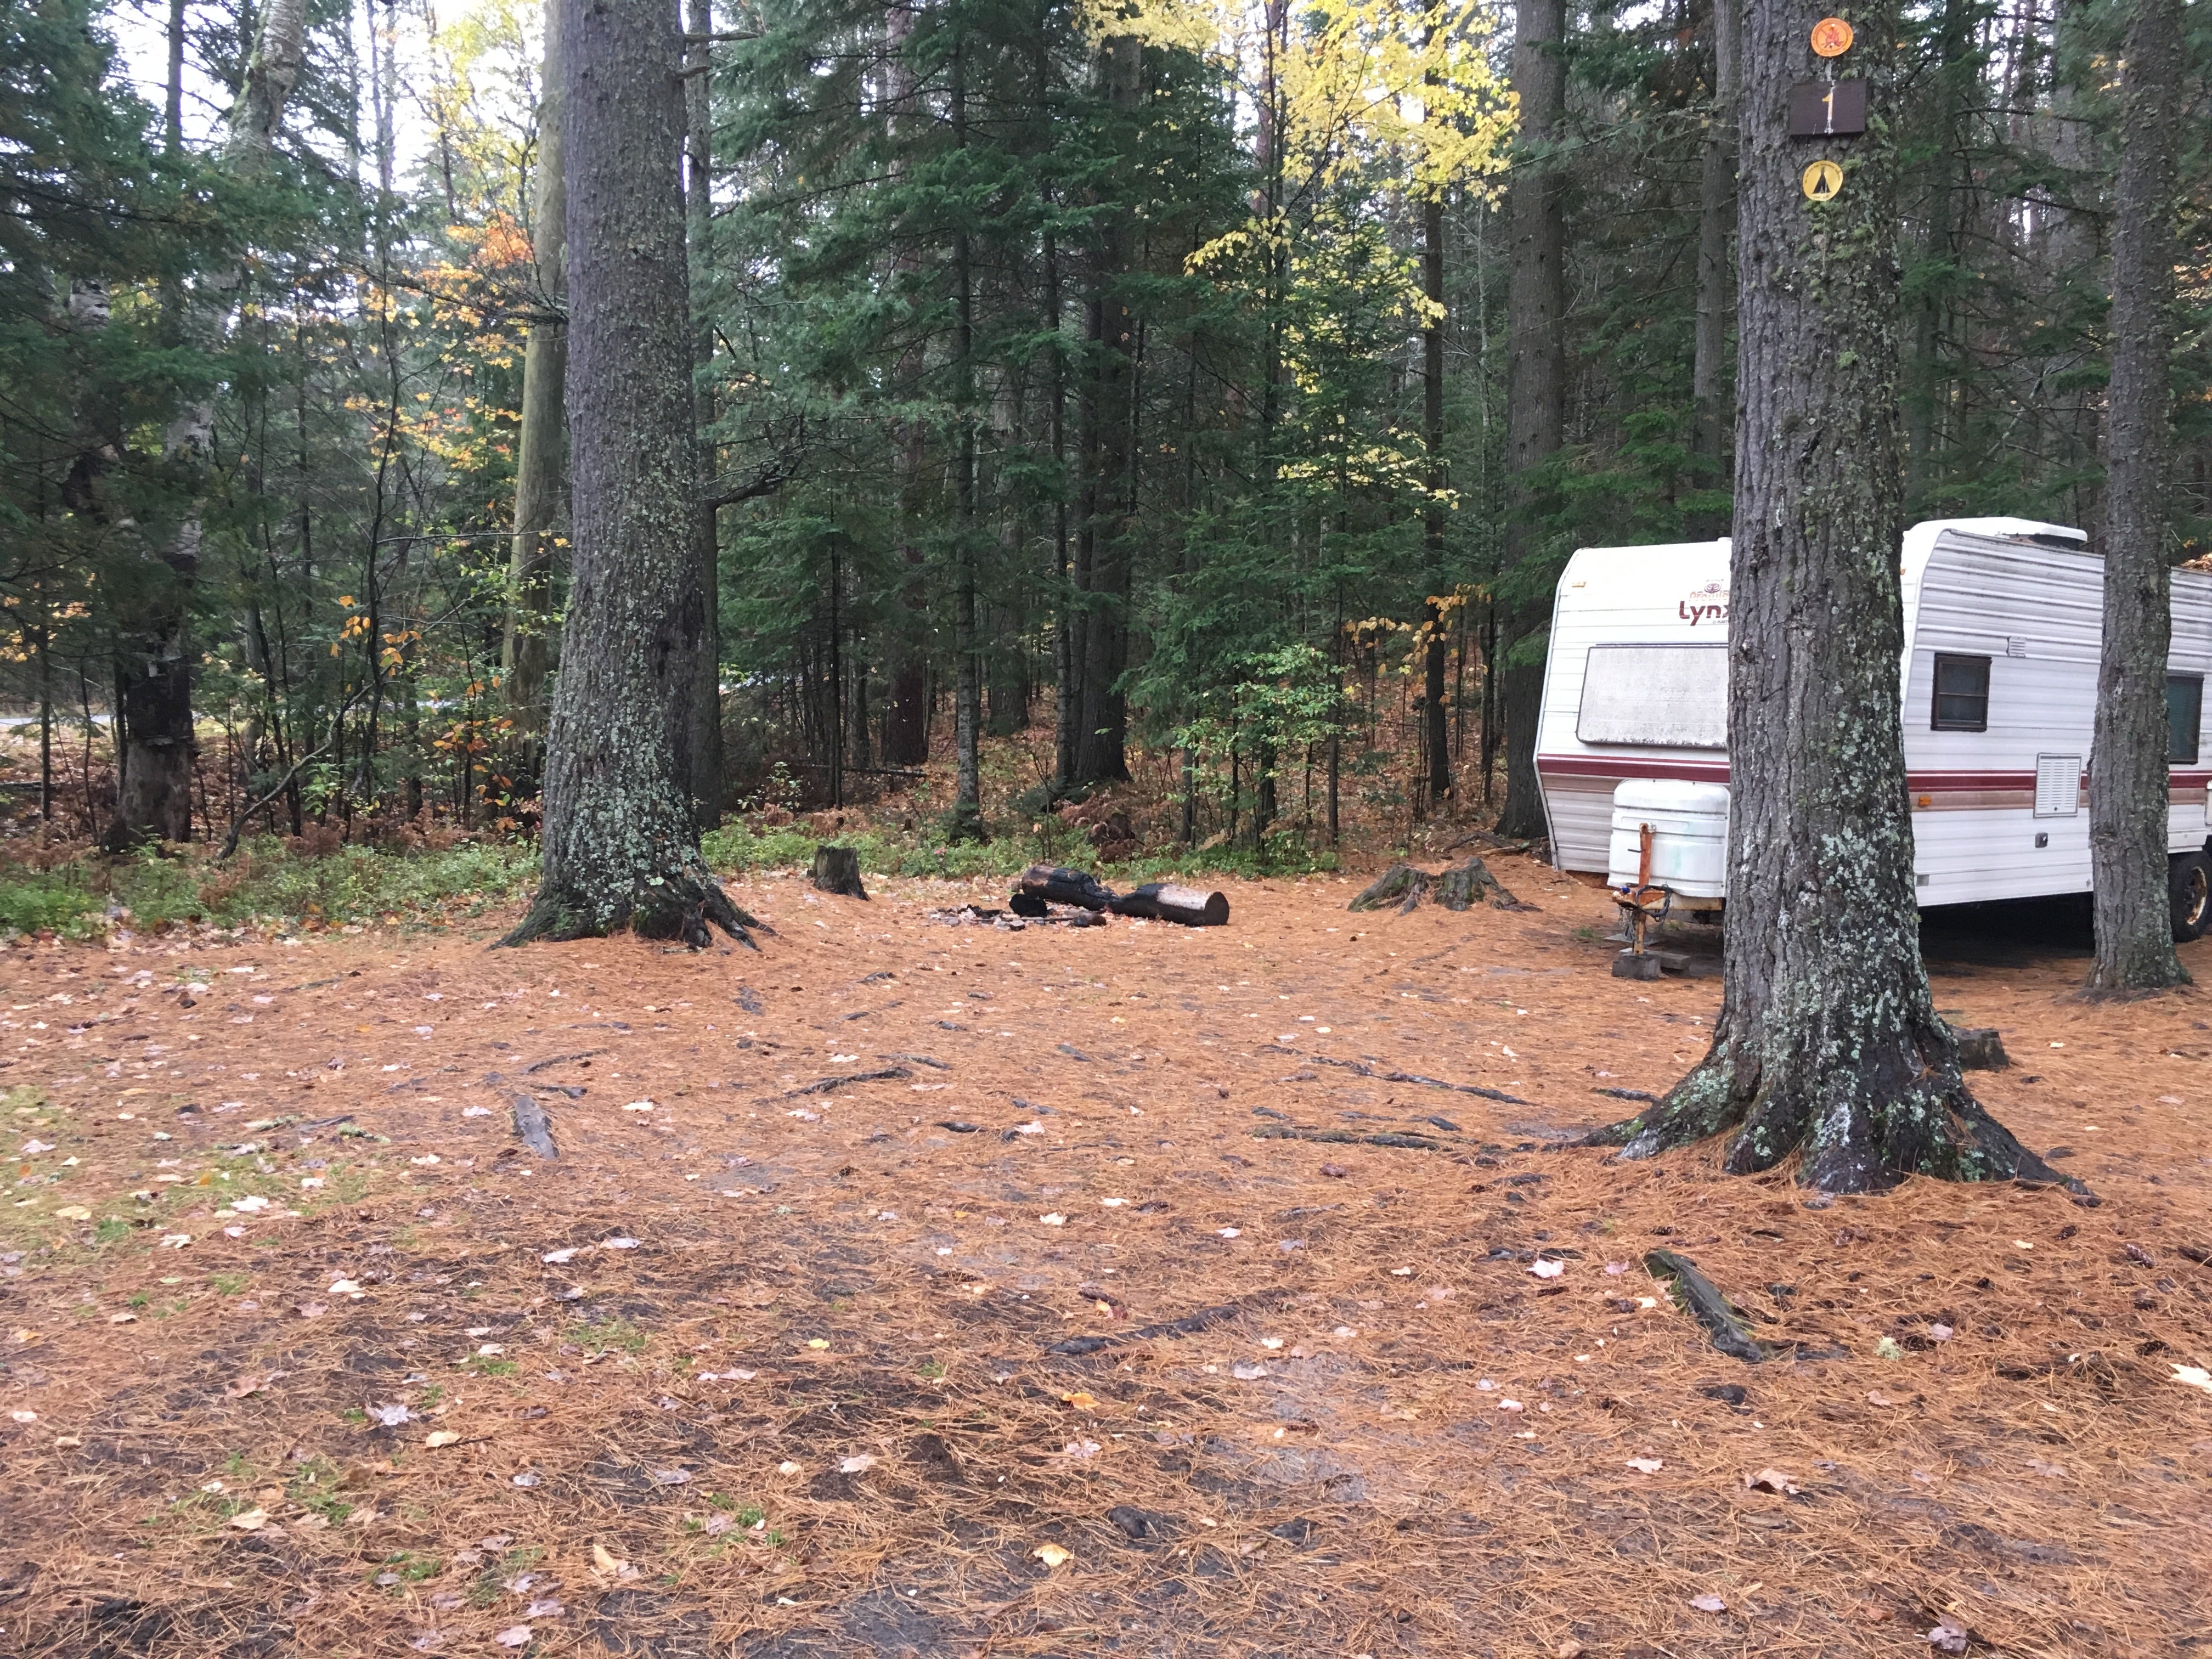 Camper submitted image from Jones Pond Campground - 4